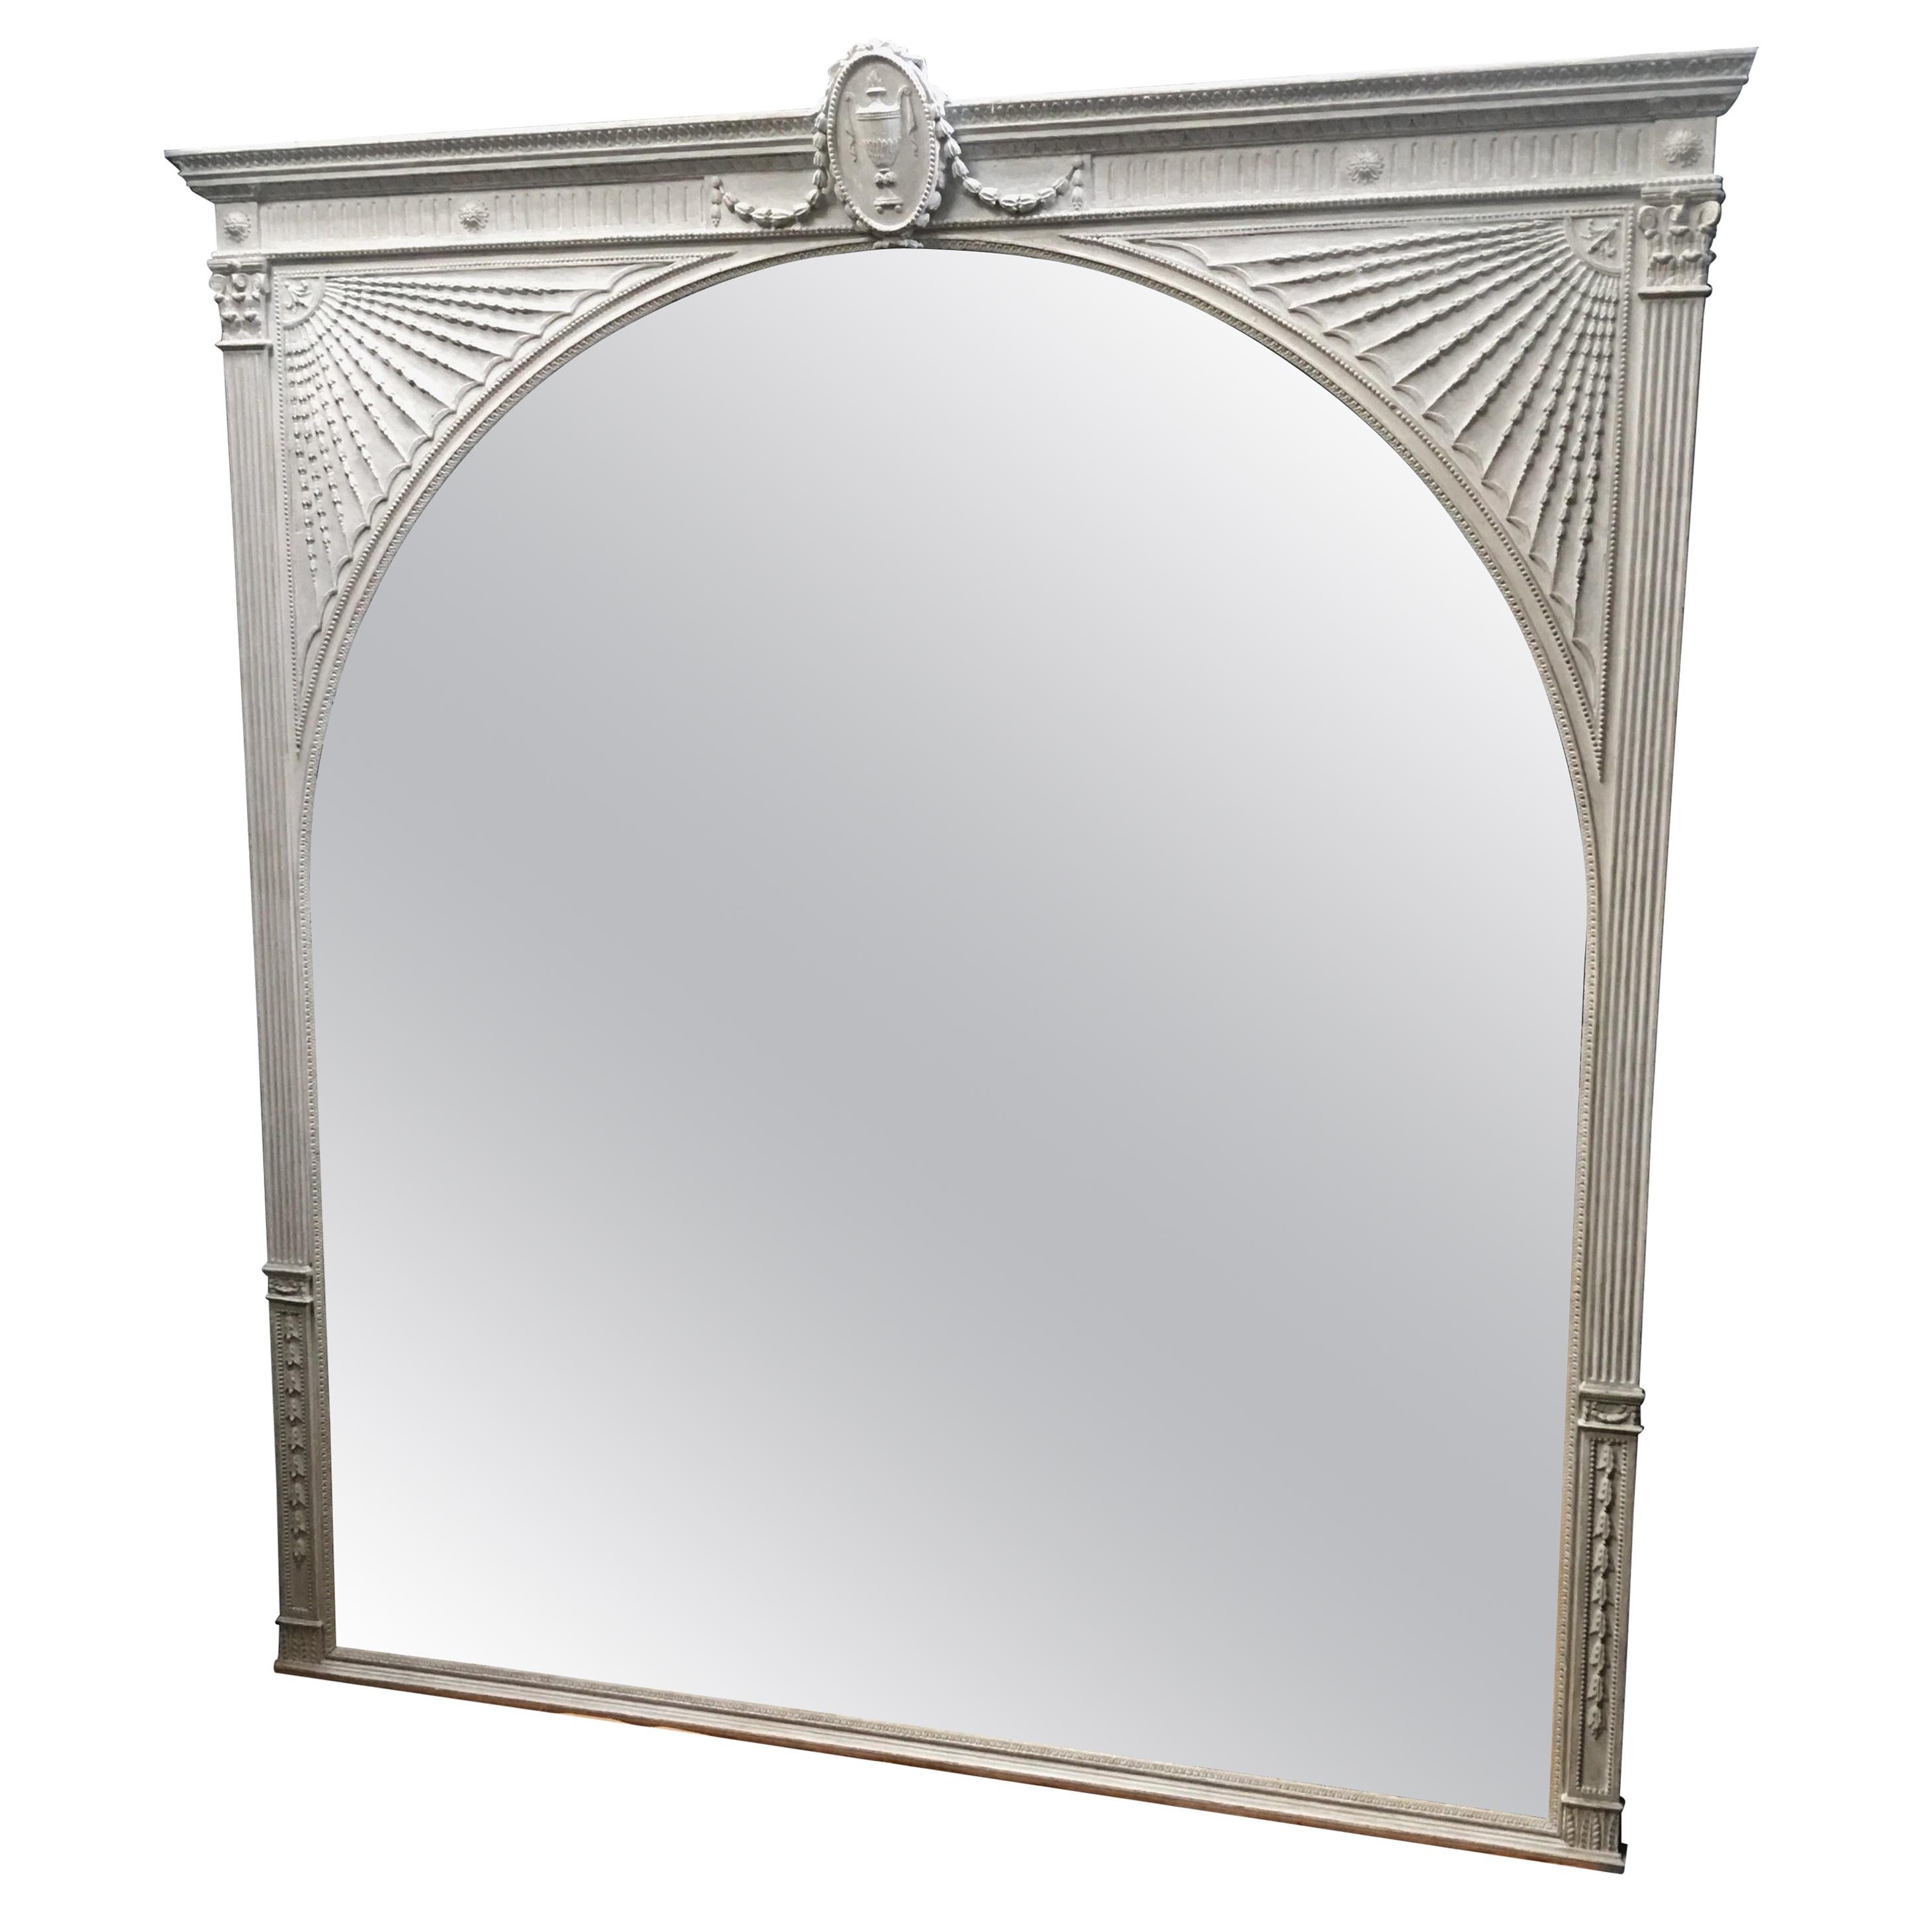 Stunning Mid-19th Century Adam Style Mirror of Great Proportions For Sale